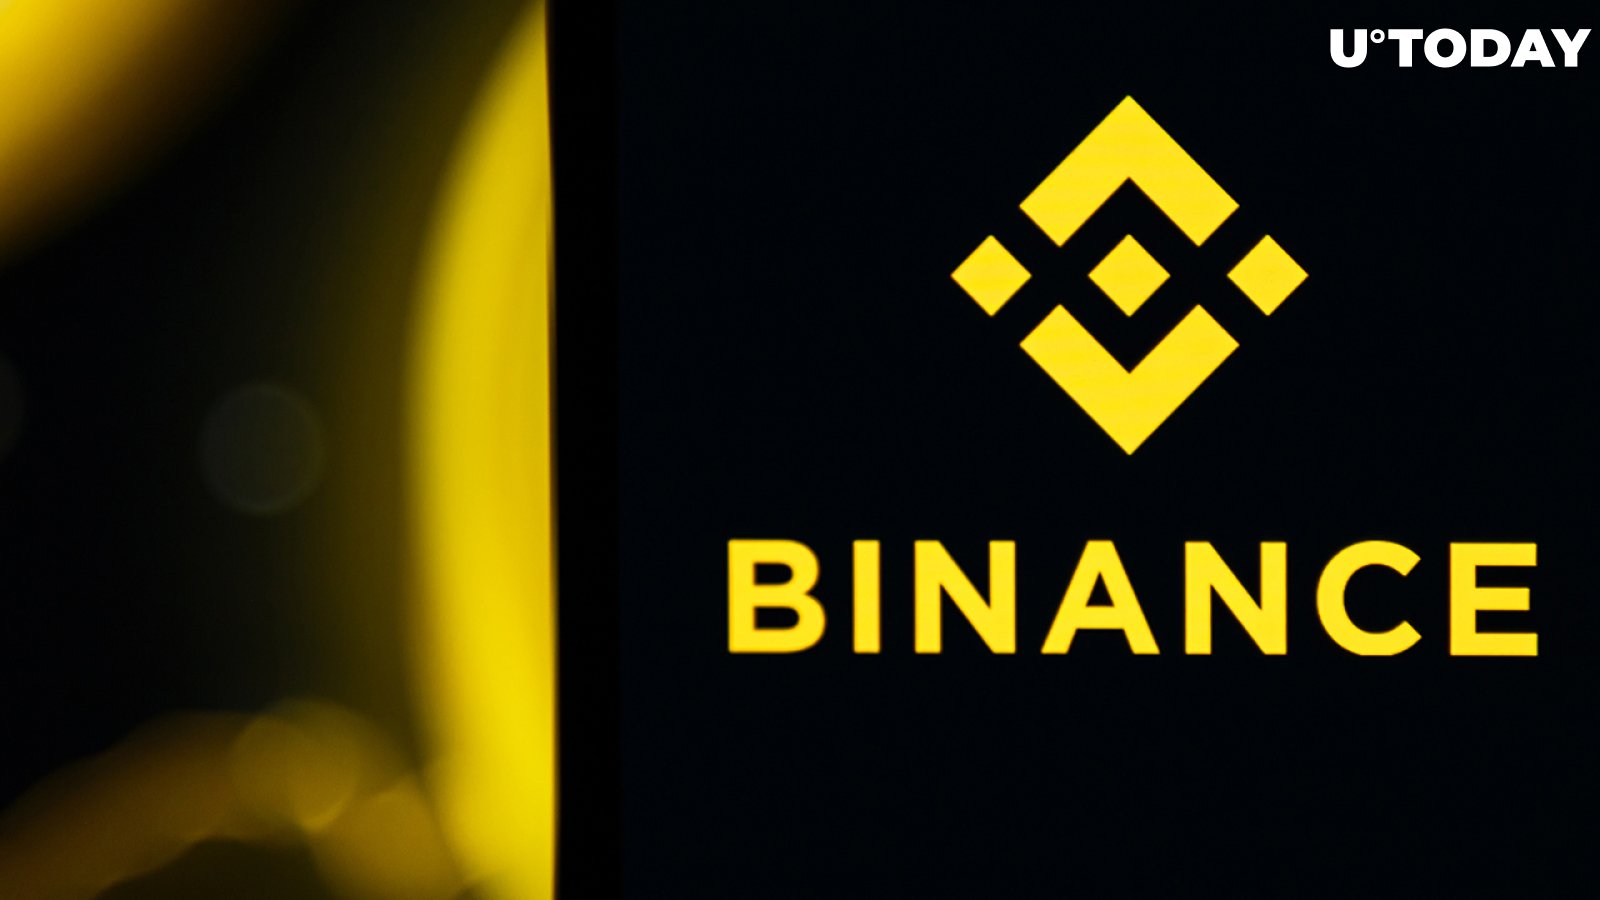 Binance CEO Denies Report About Delisting U.S.-Based Projects  